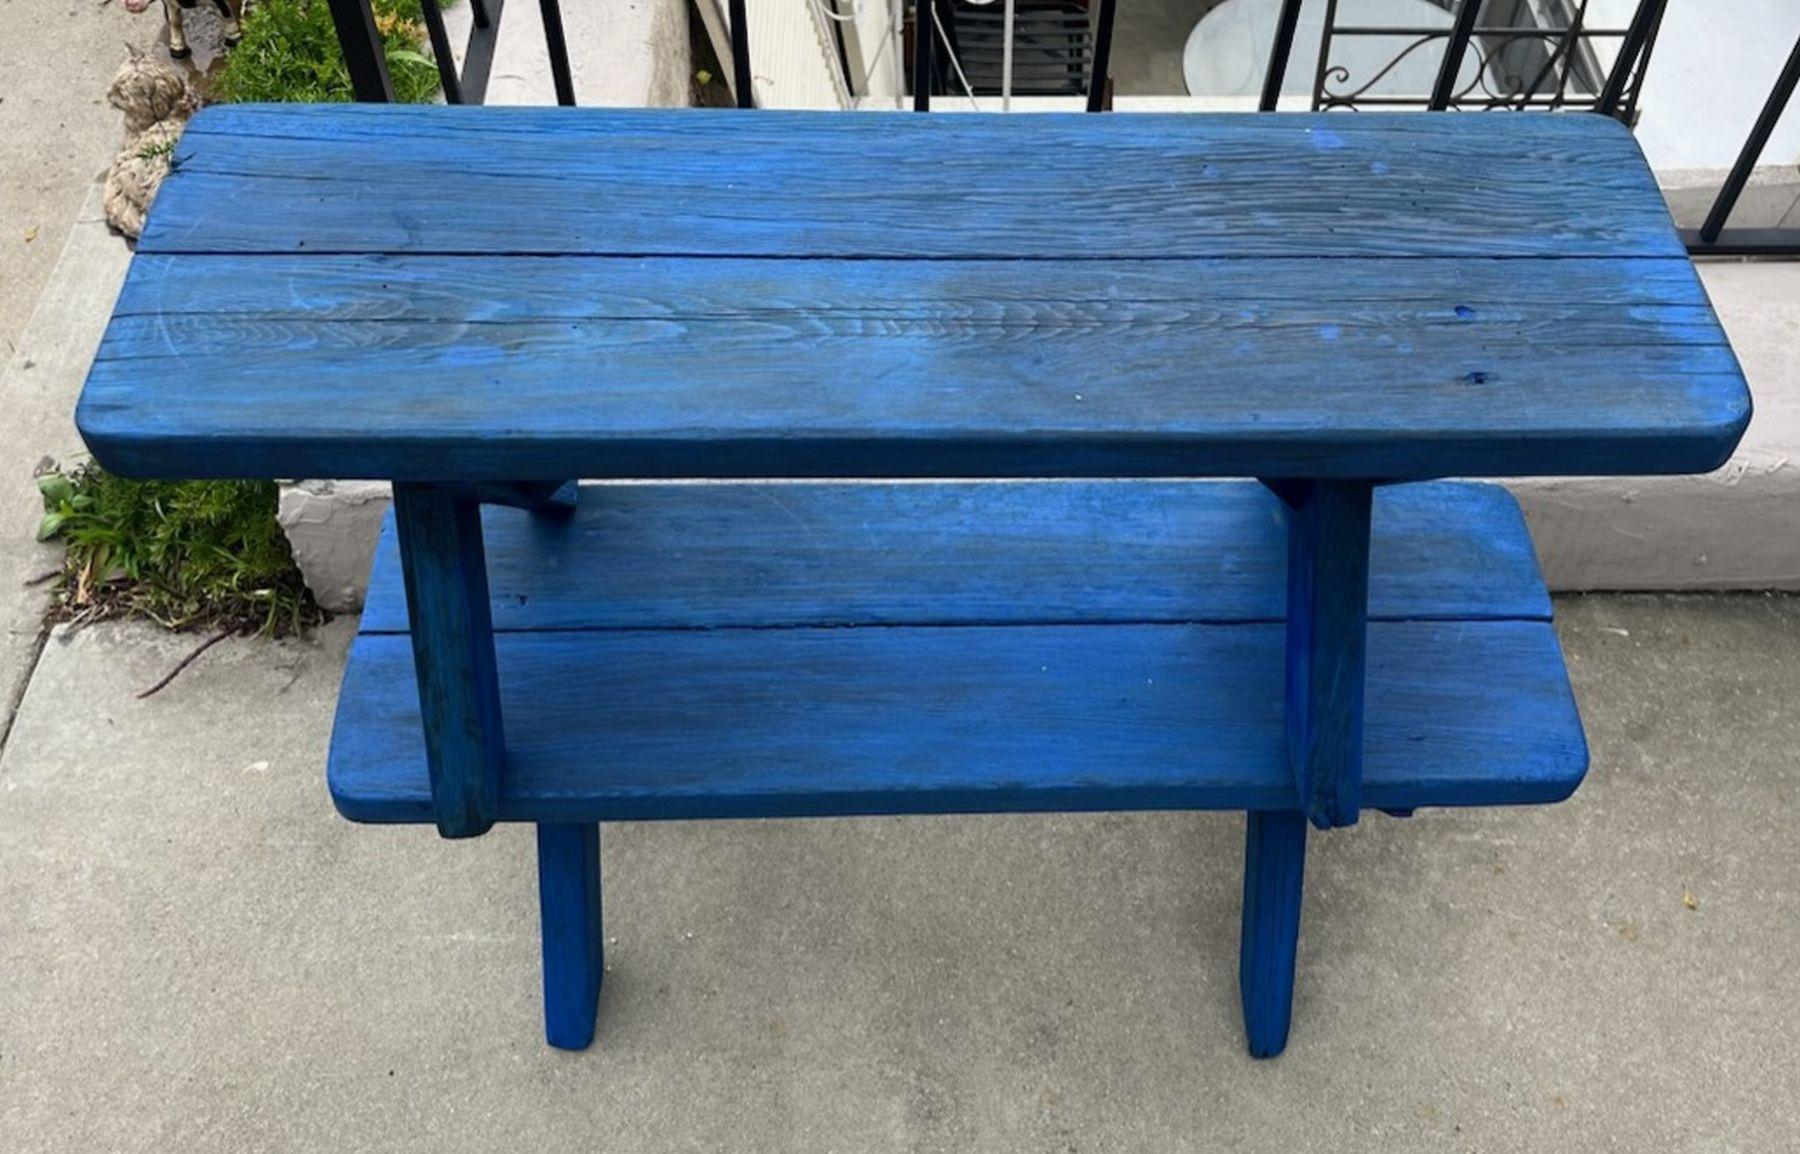 20Thc Blue painted park benches or picnic benches in fantastic sturdy condition.These benches are blue over red painted surface.Both are in  very good condition. The pair were found in the mid west.Sold as a pair.